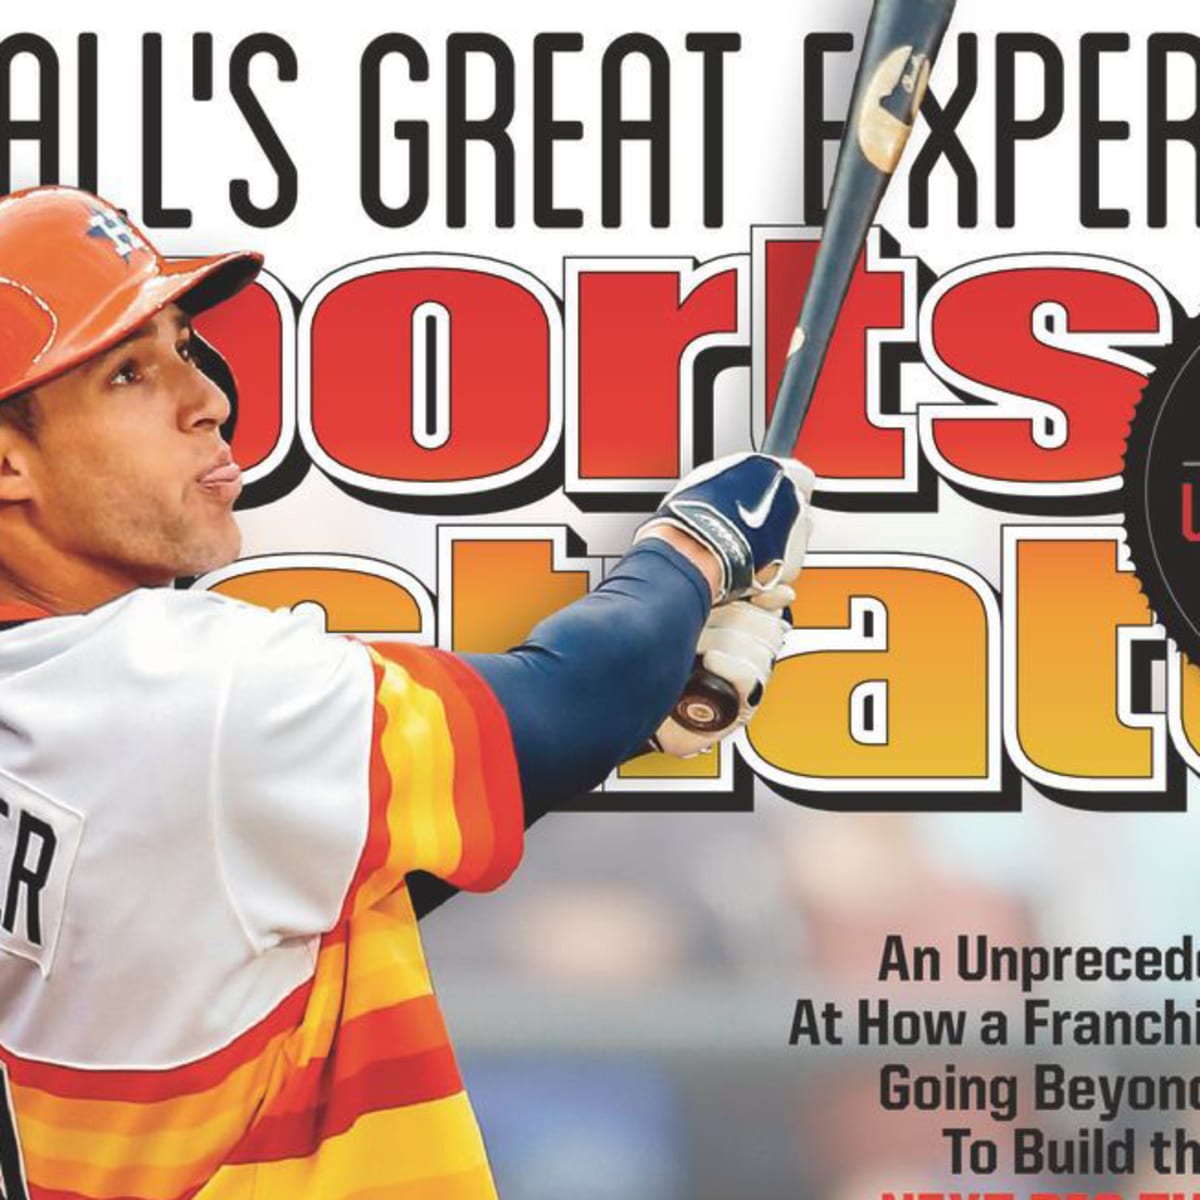 Kansas City Royals: World Series champions appear on SI cover - Sports  Illustrated